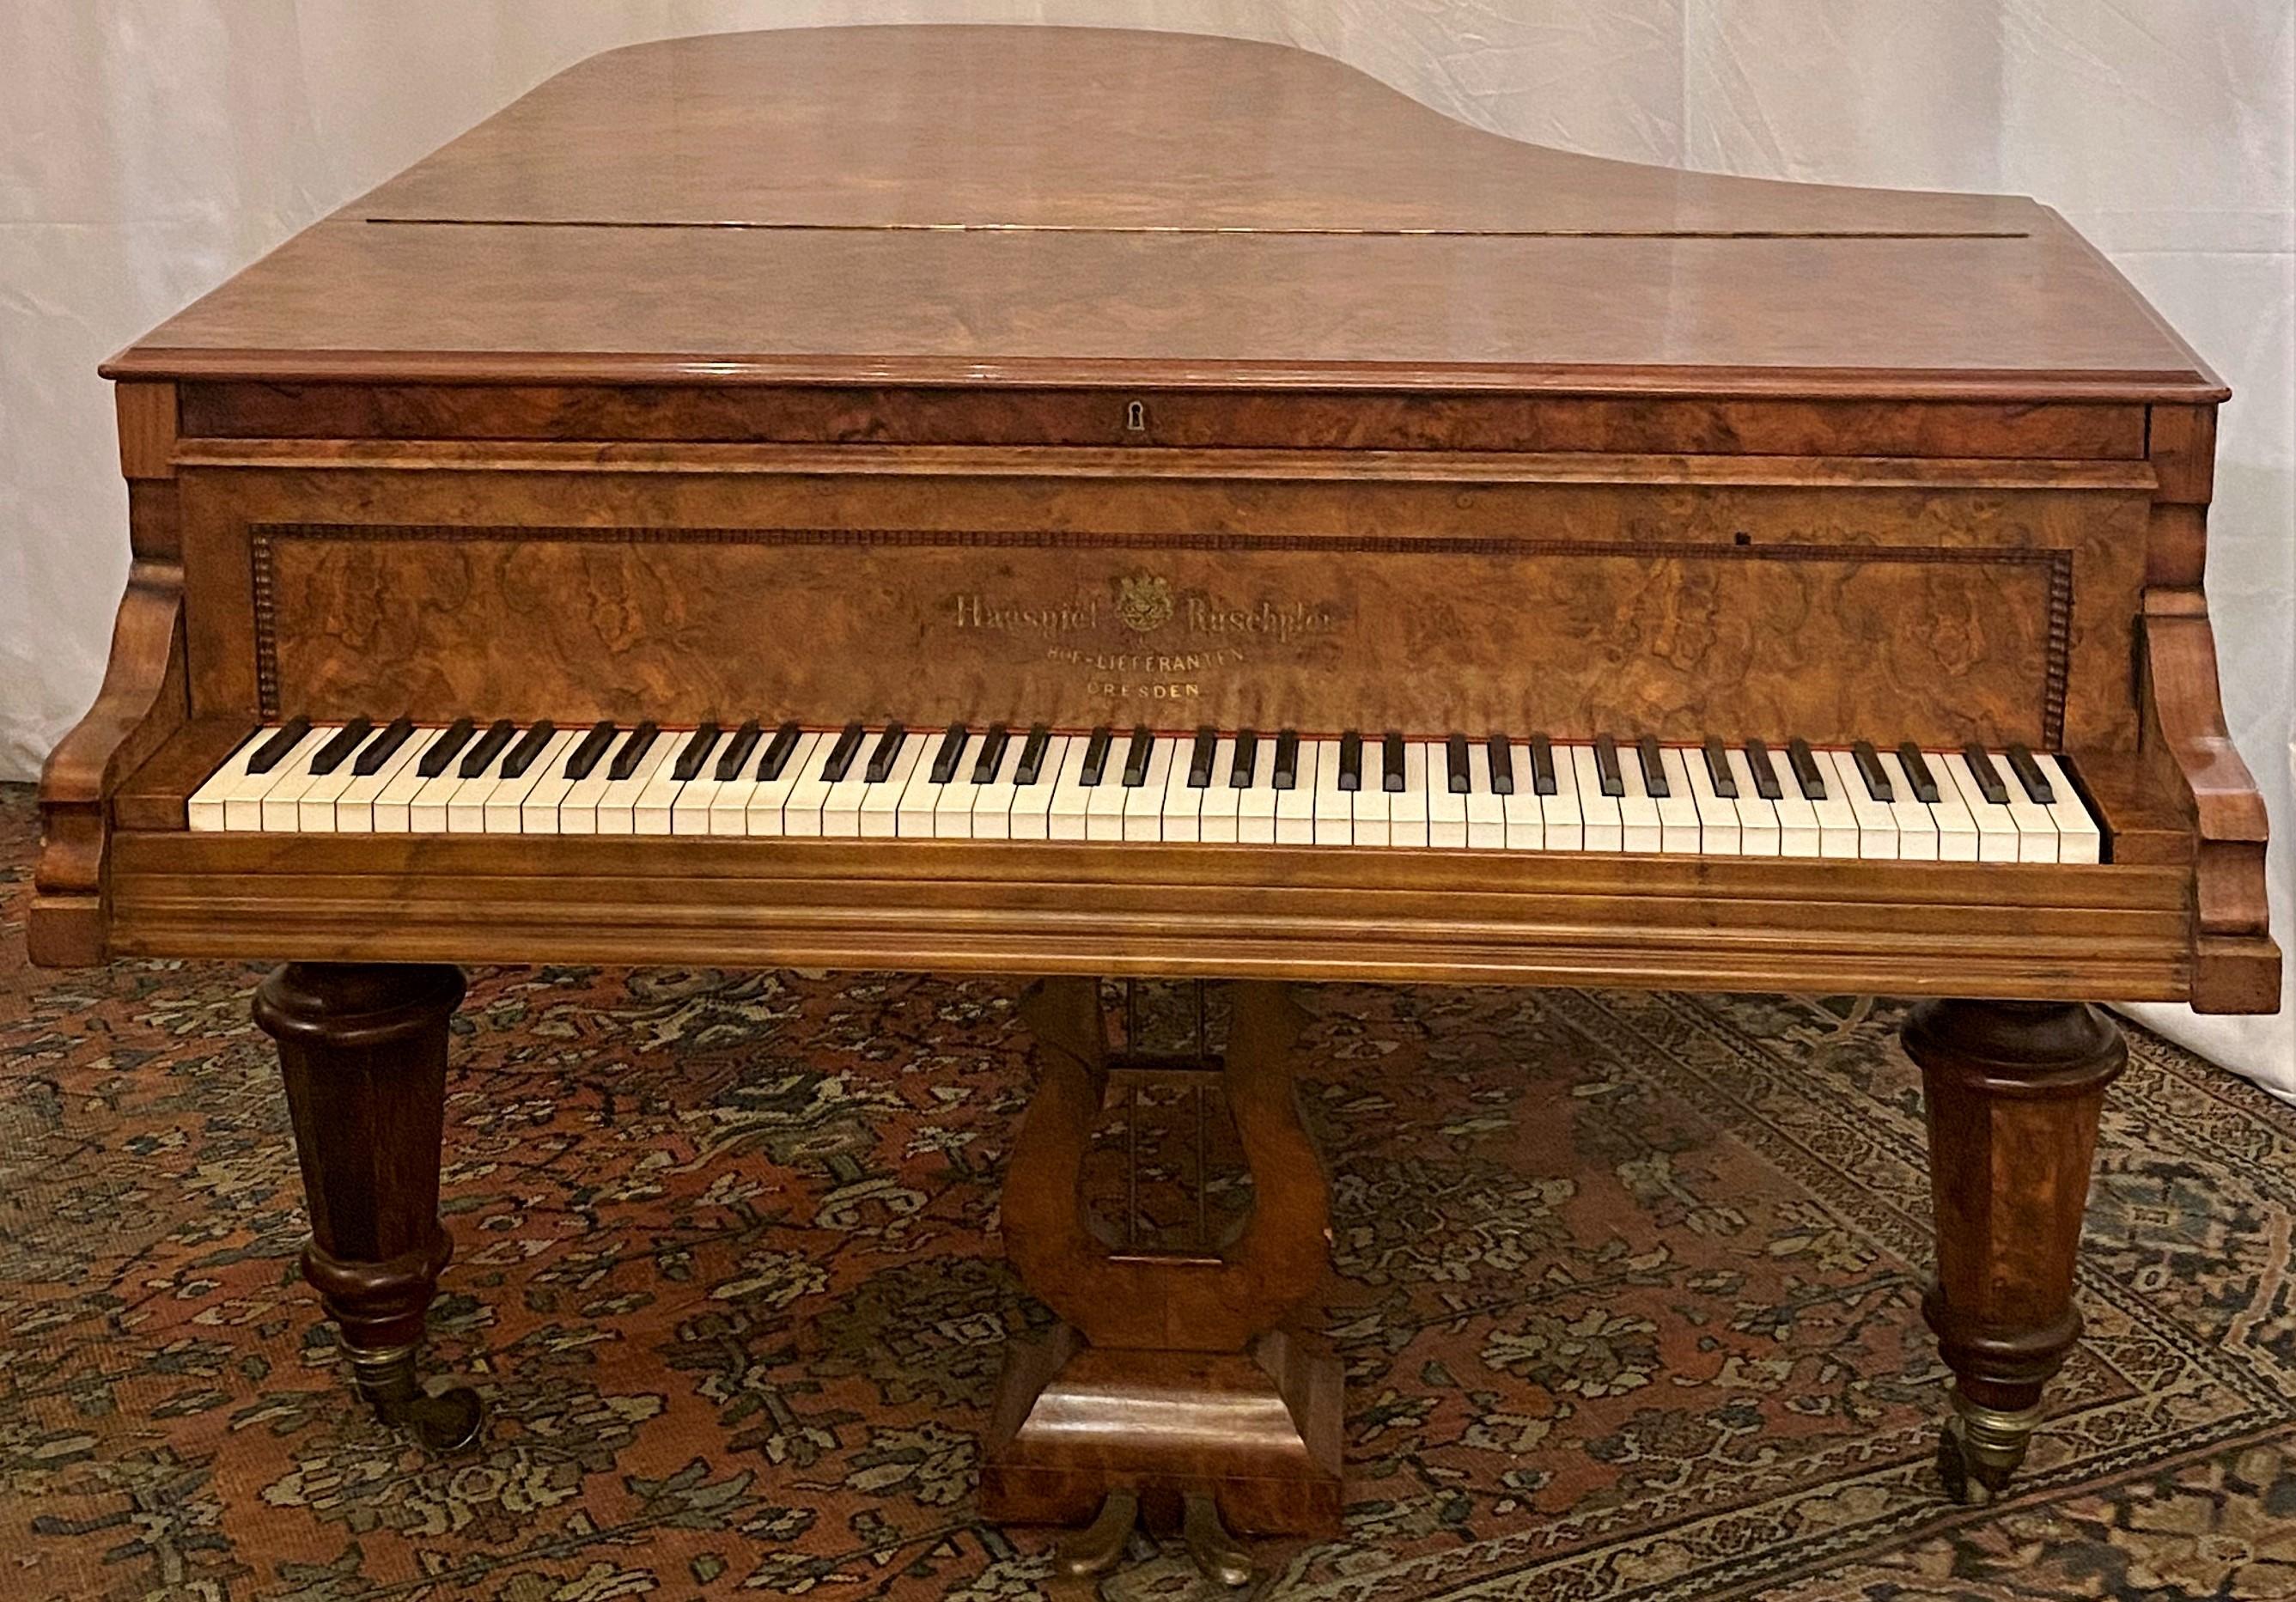 Antique Burled Walnut Parlor Grand Piano Made by Hagspiel & Ruschpler circa 1875 In Good Condition In New Orleans, LA